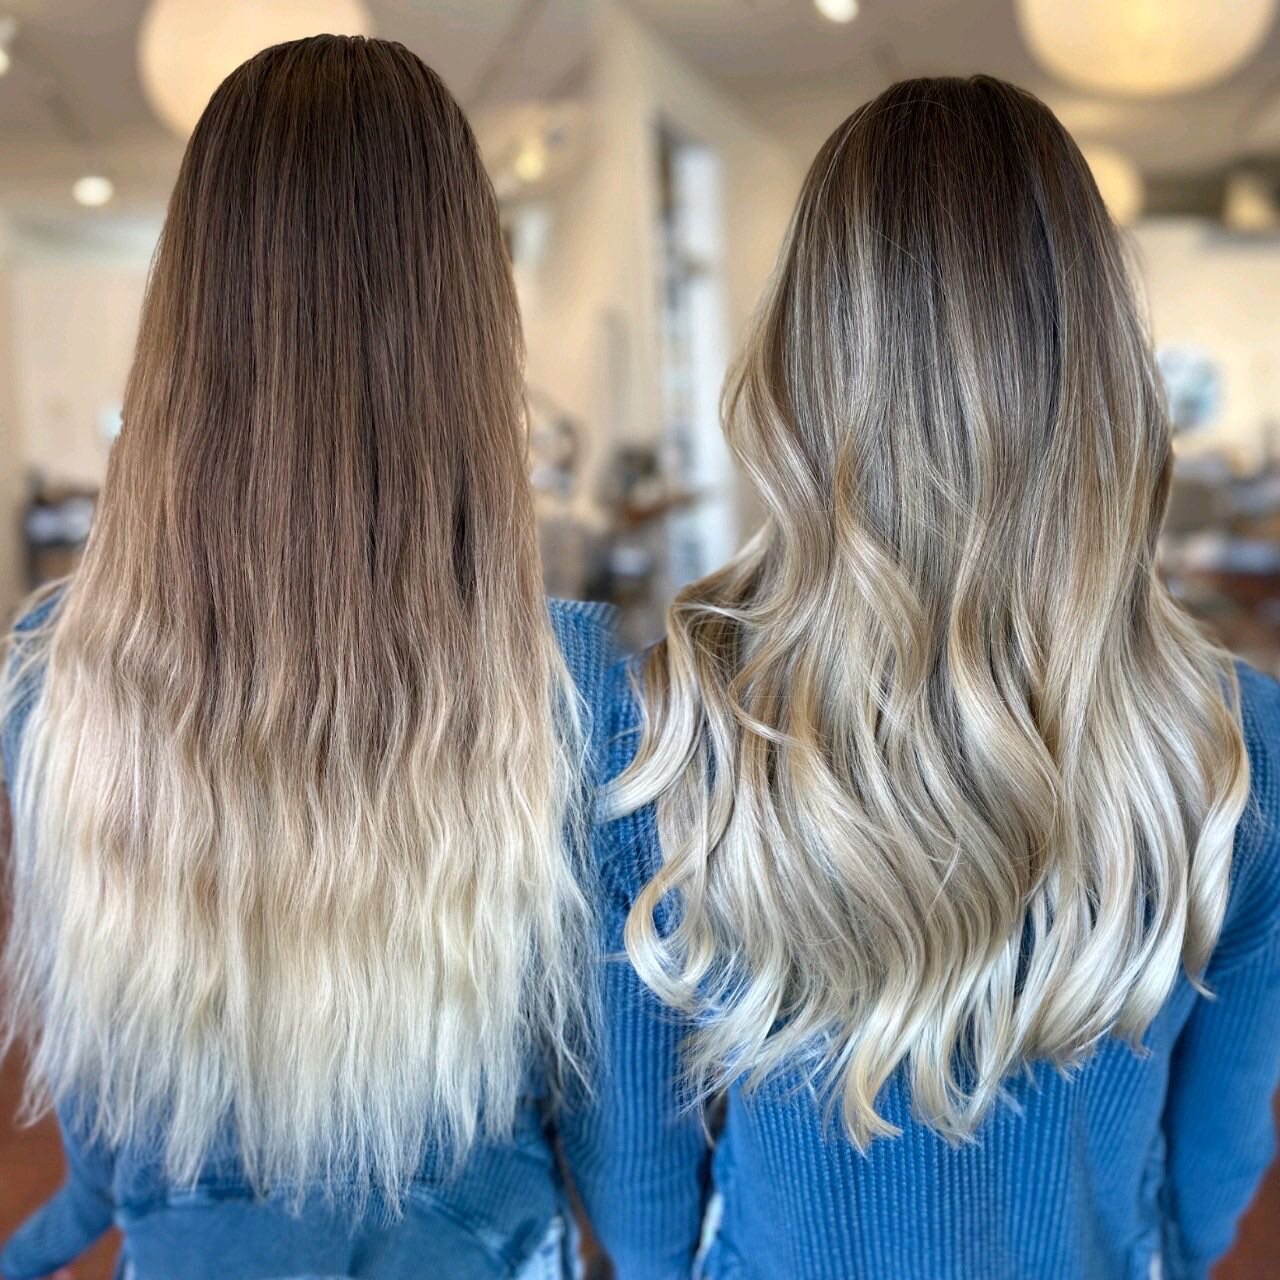 In case you forgot- I do color too 🪄

Brightened and blended blonde for my girl @ninja__nett

#bayareacolorist #sfblondespecialist #berkeleyhairstylist